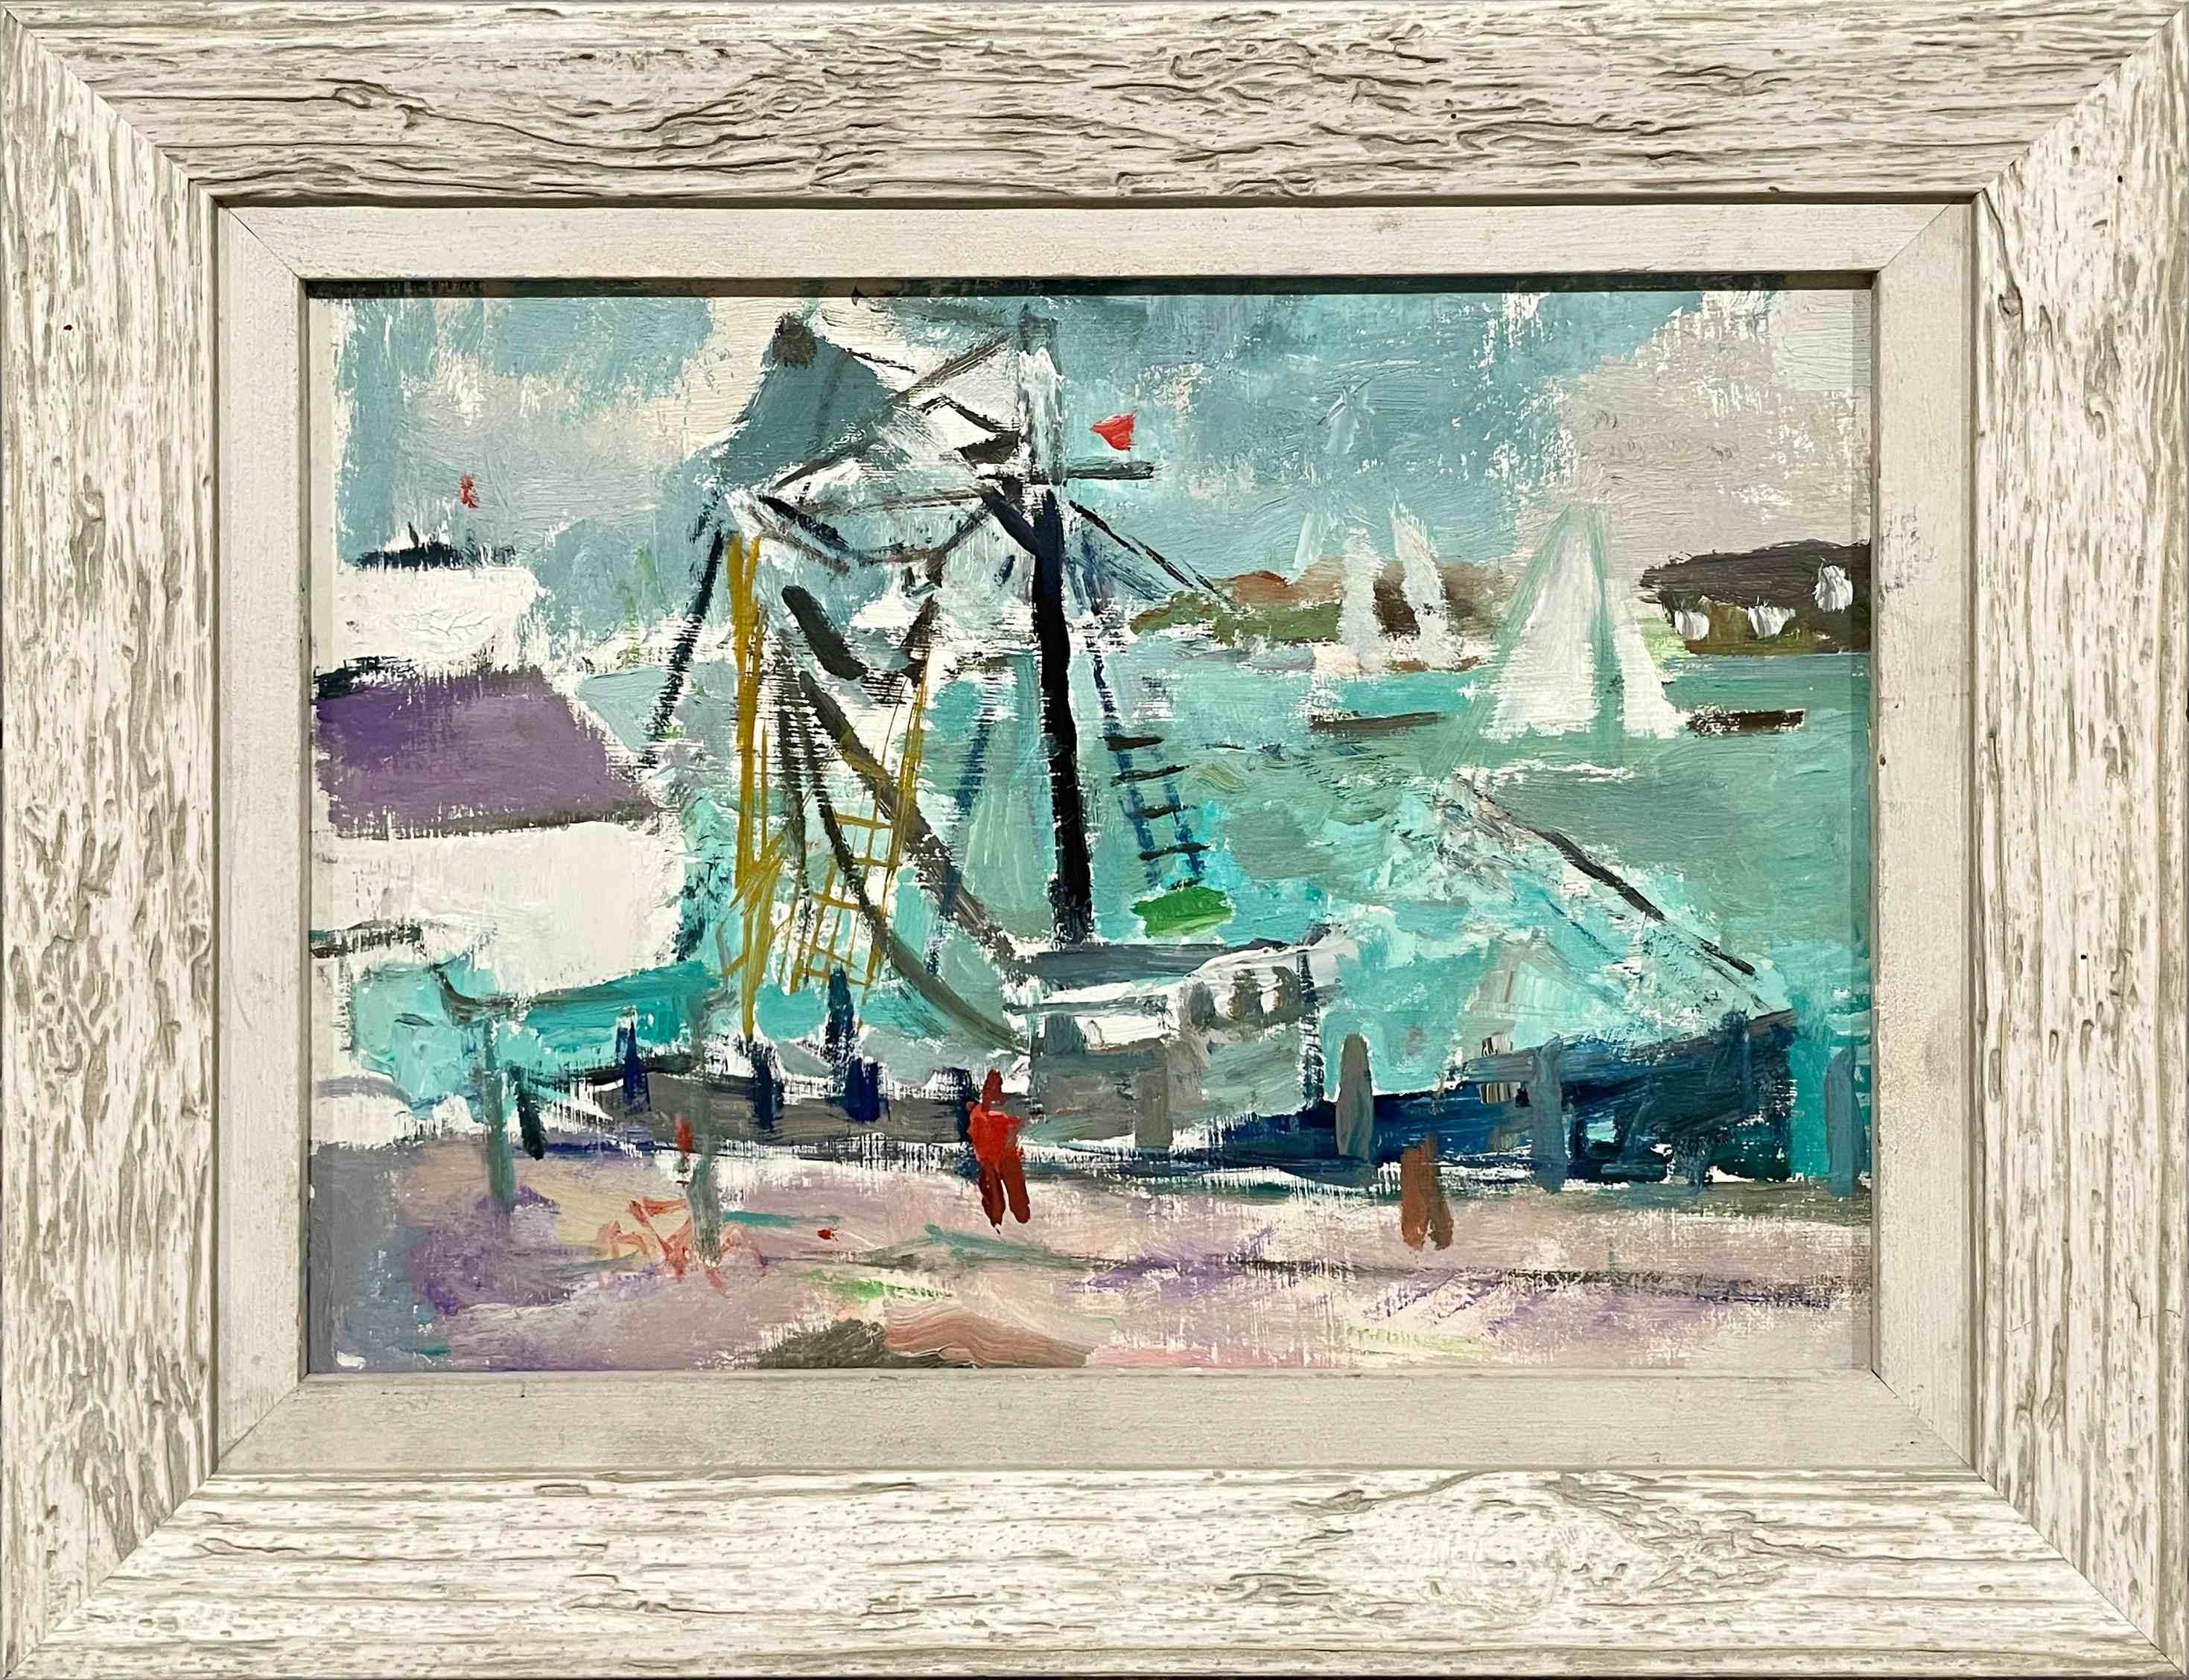 Untitled (Vineyard Harbor) - Painting by Francis Chapin